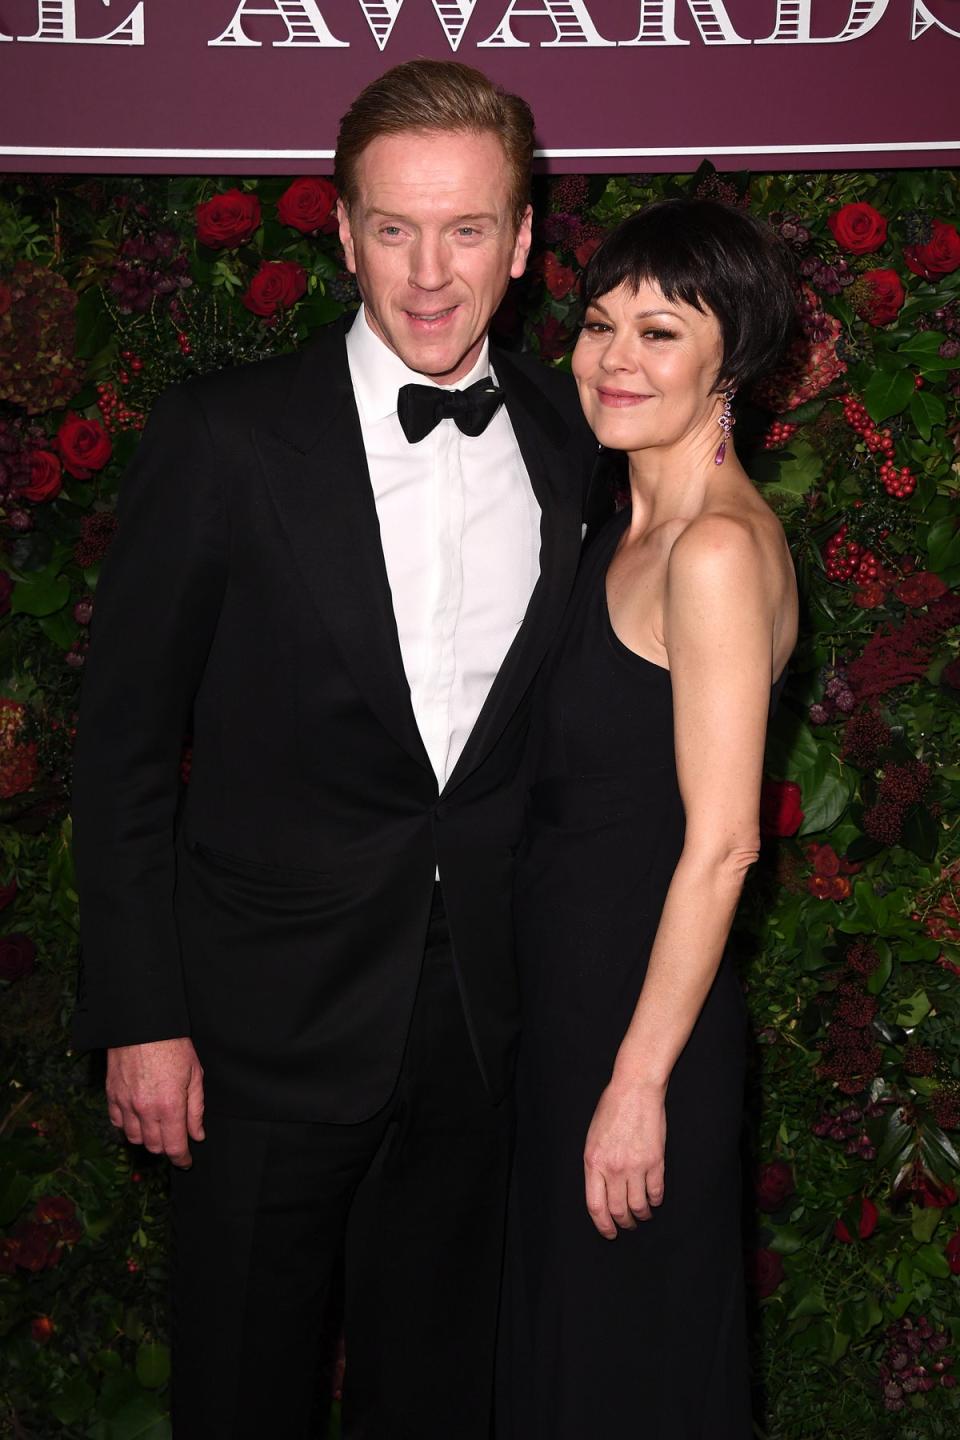 Damian Lewis and Helen McCrory were married for 14 years (Getty Images)